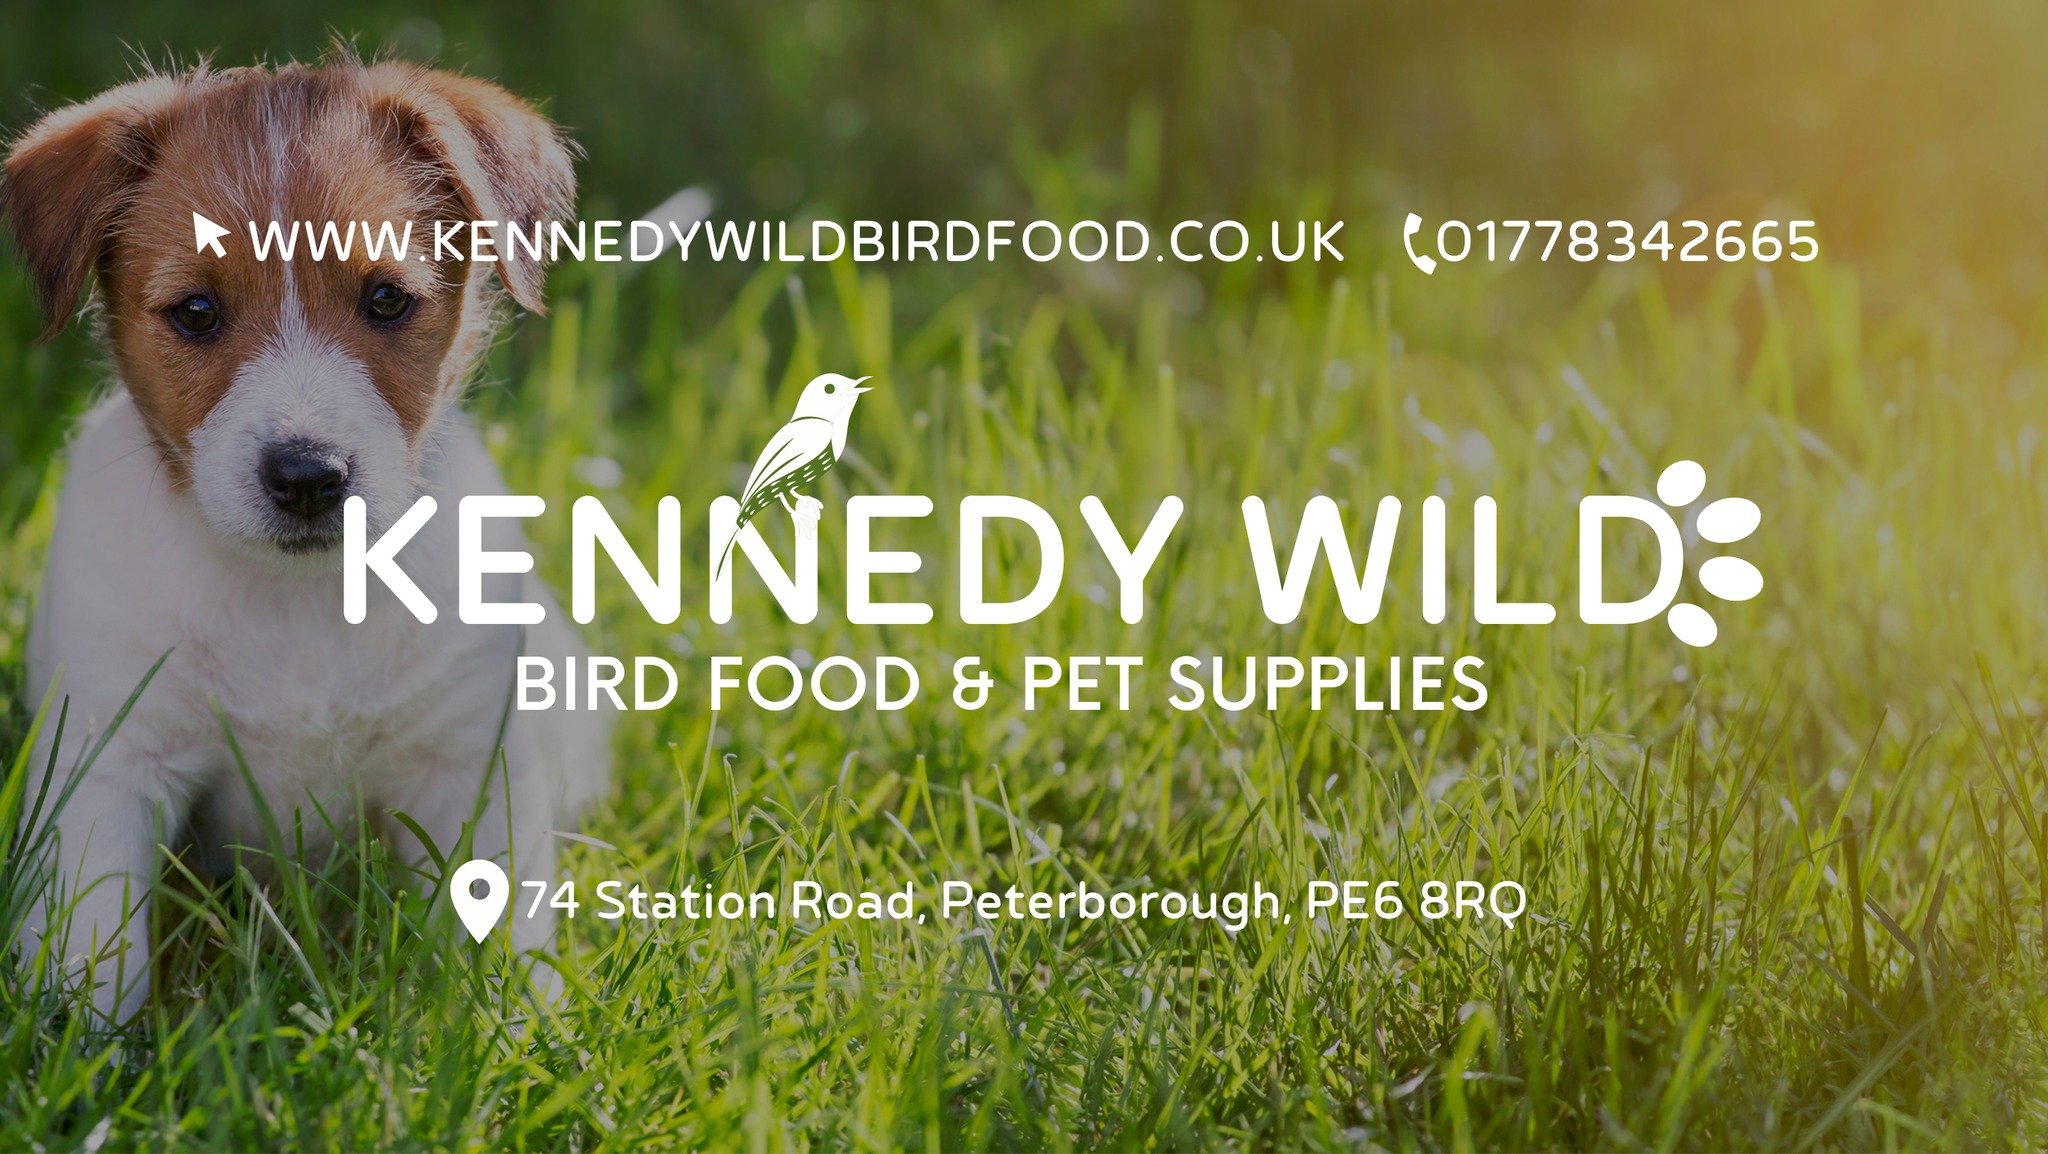 Kennedy Wild Bird Food And Pet Supplies Cover Image